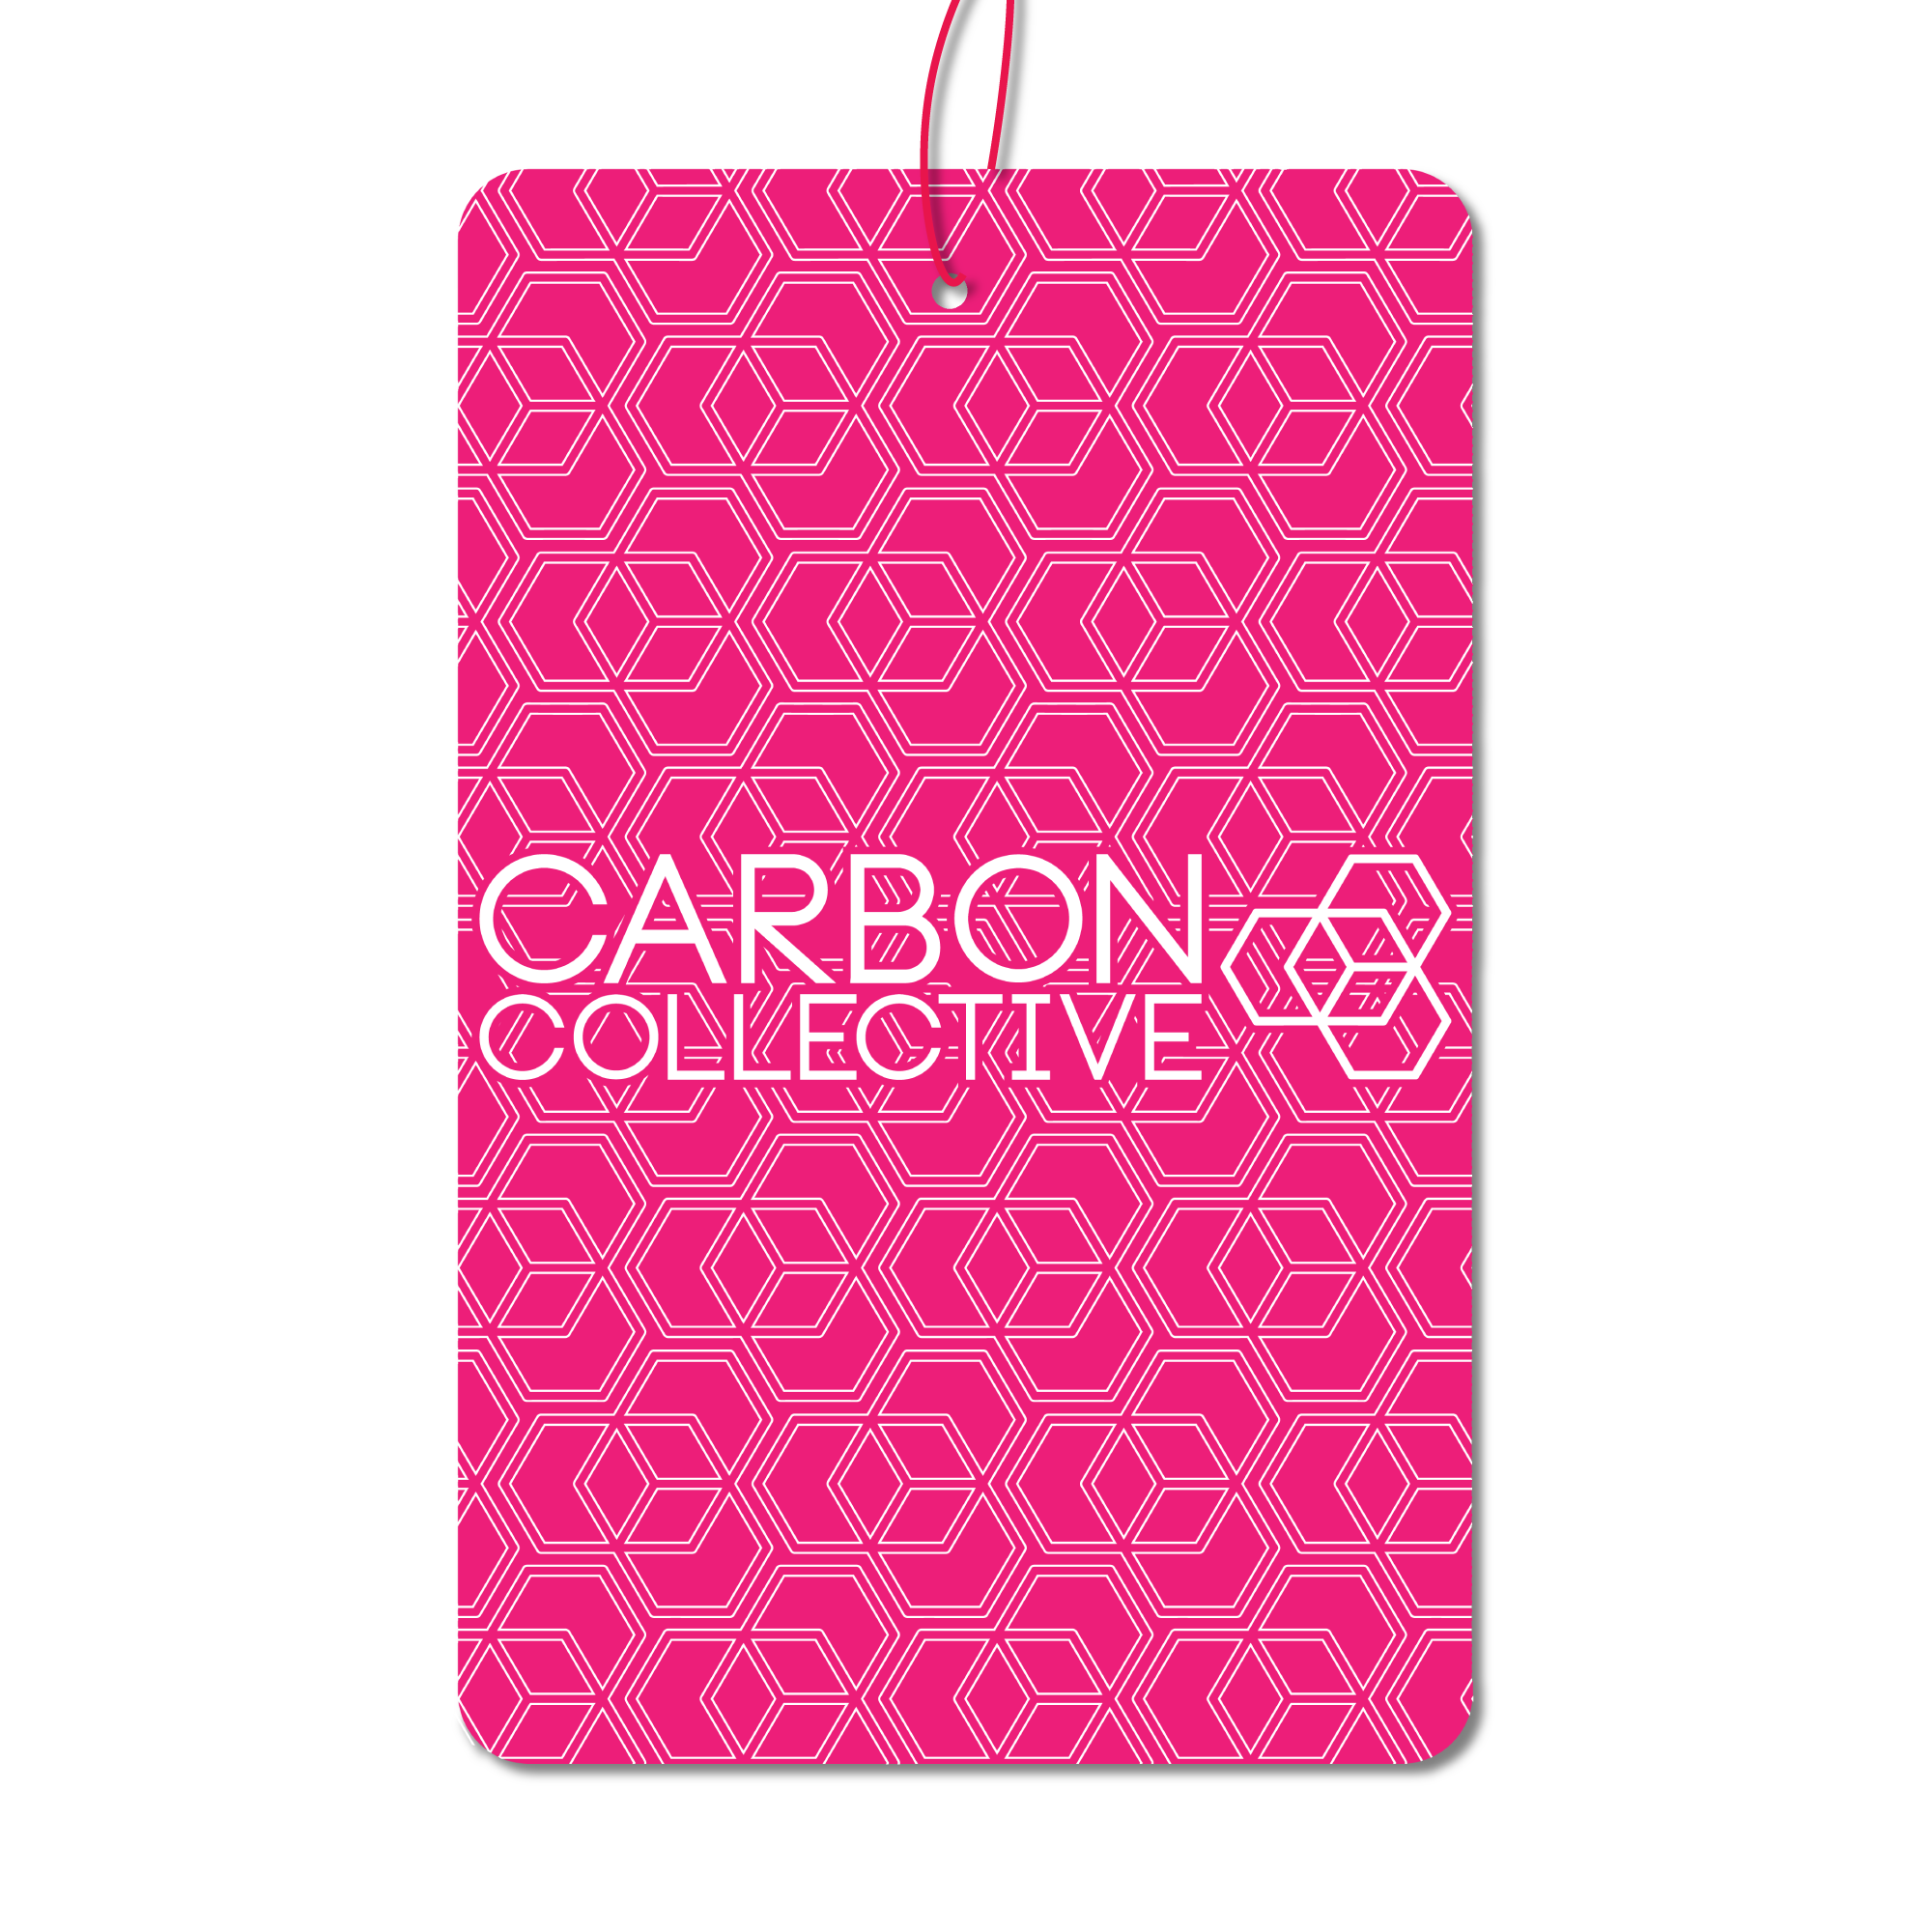 Carbon Collective Hanging Air Fresheners The Cologne Collection 2023